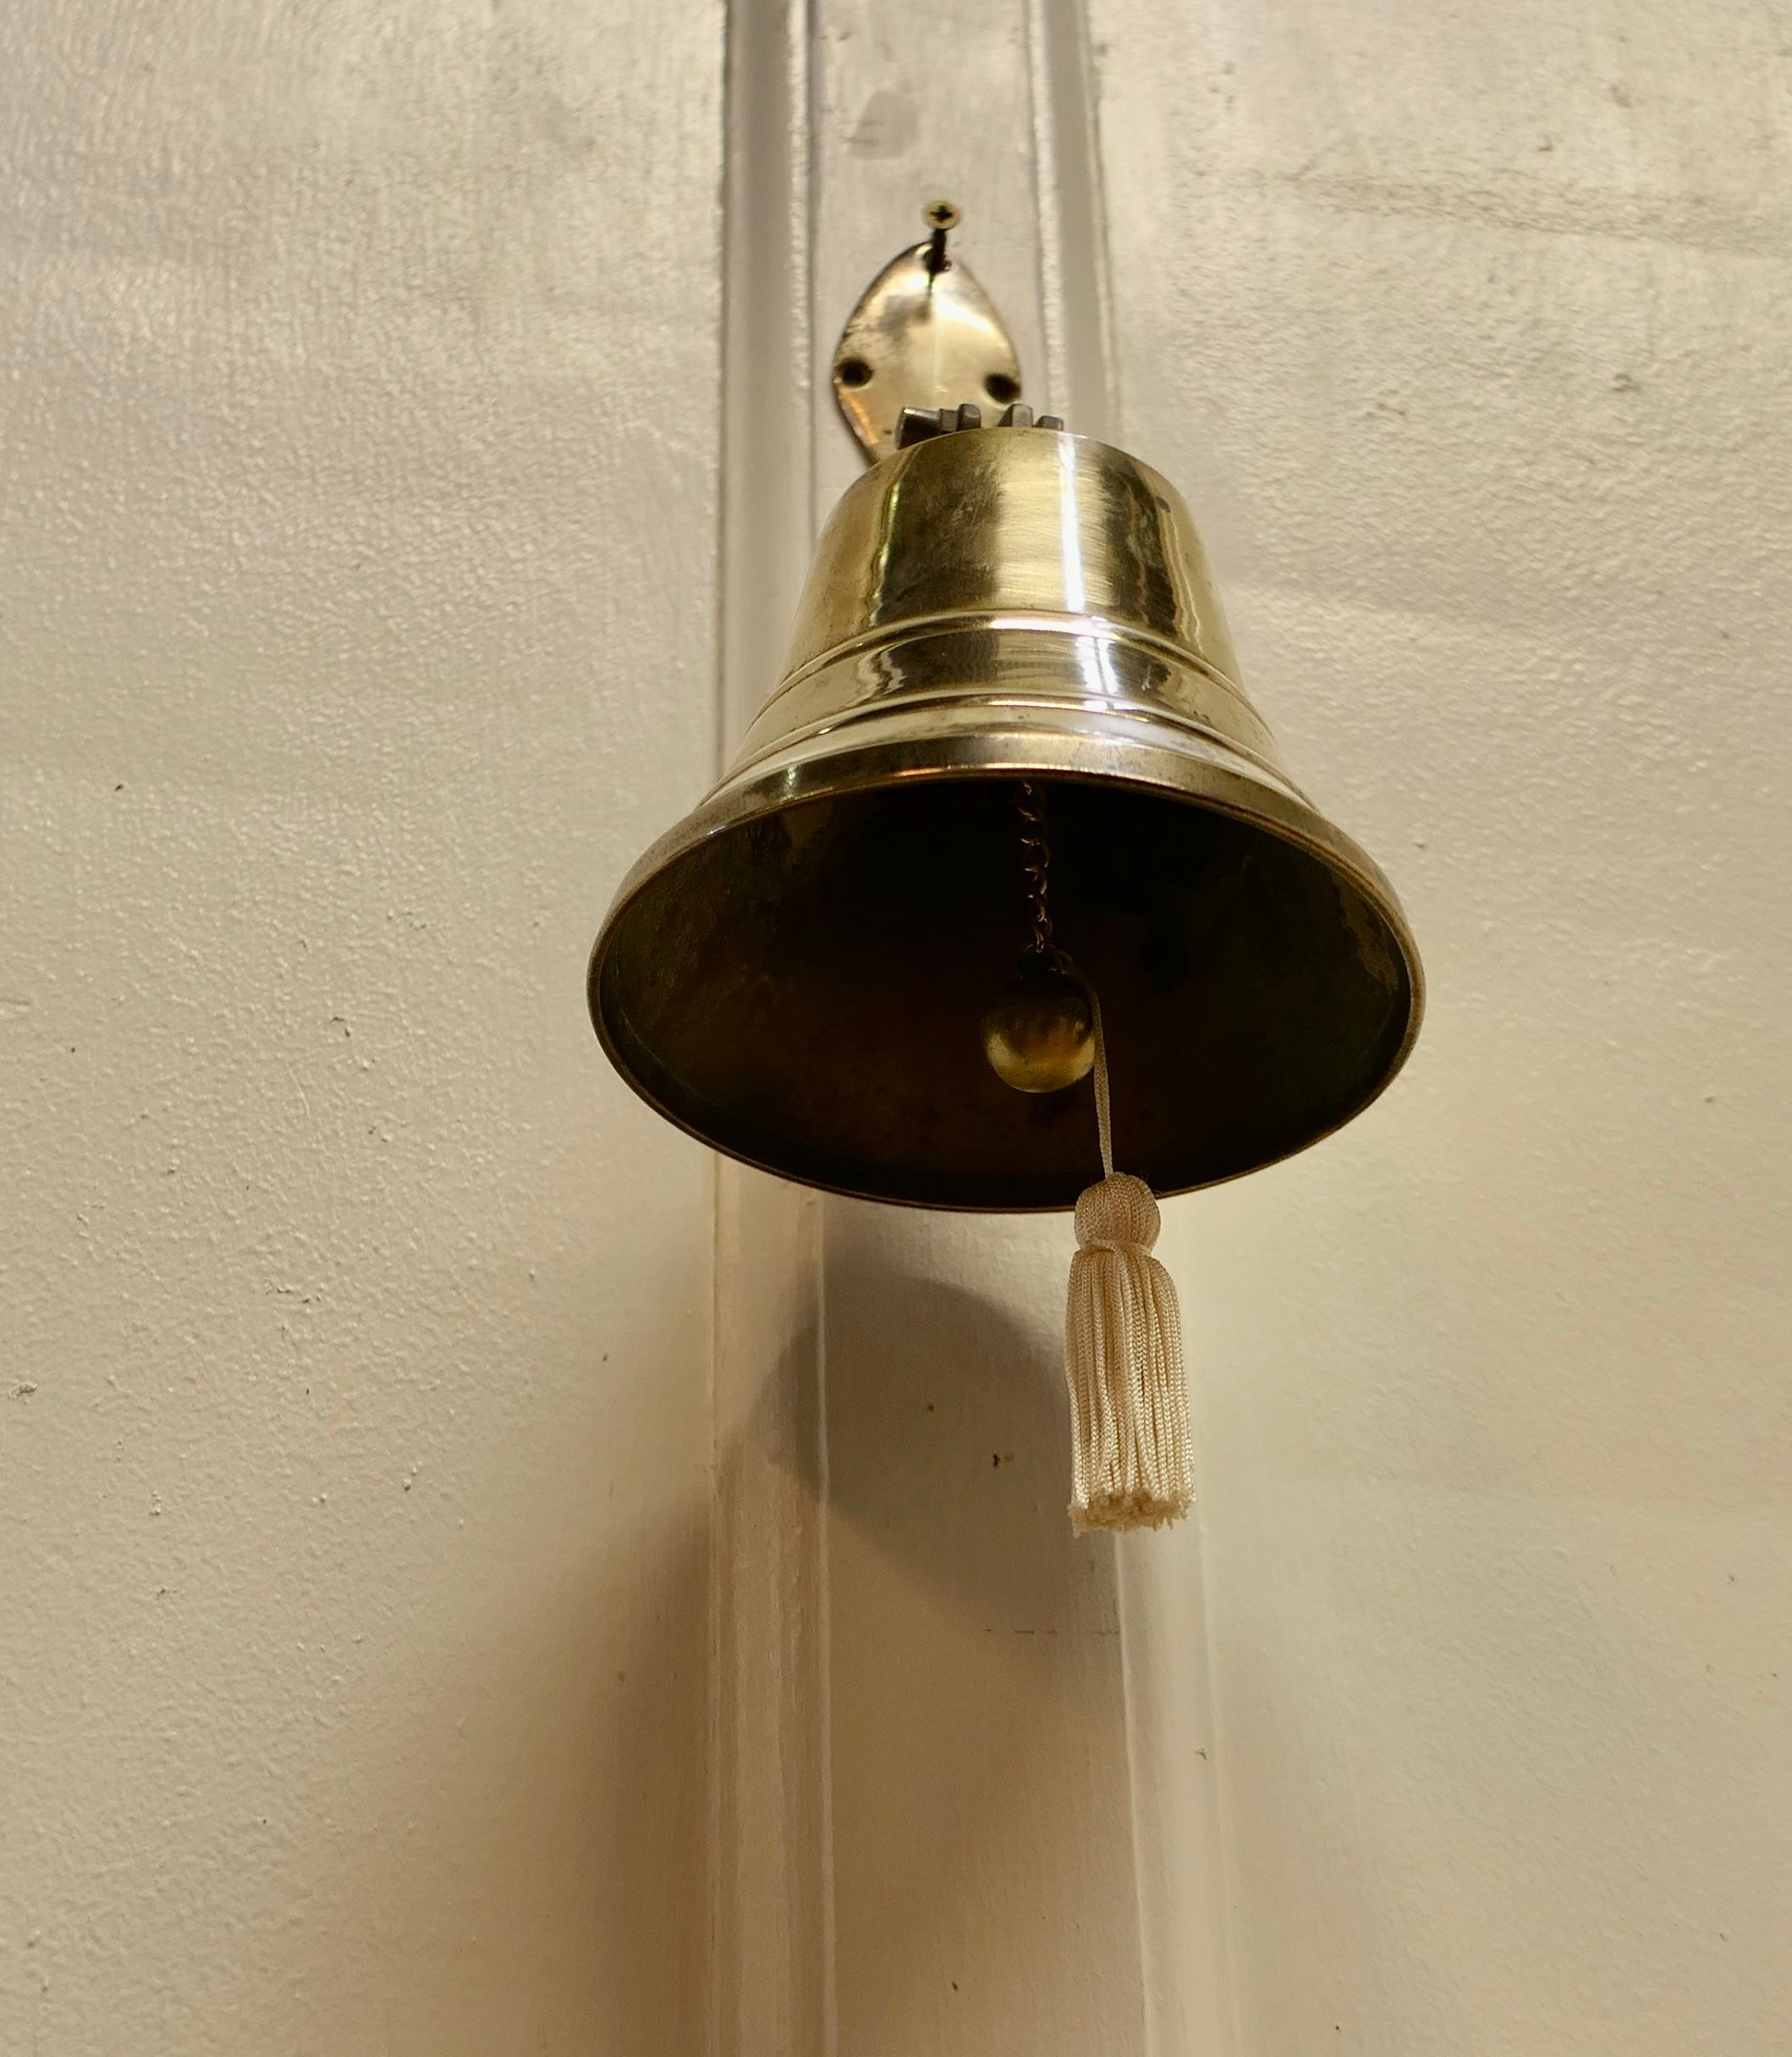 Wall hanging brass door bell.

This bell is on a hinged brass bracket and comes complete with hand clapper, it is in very good condition, it is very loud and would work well as a door bell 
A great piece in excellent condition.
The bell is 10”